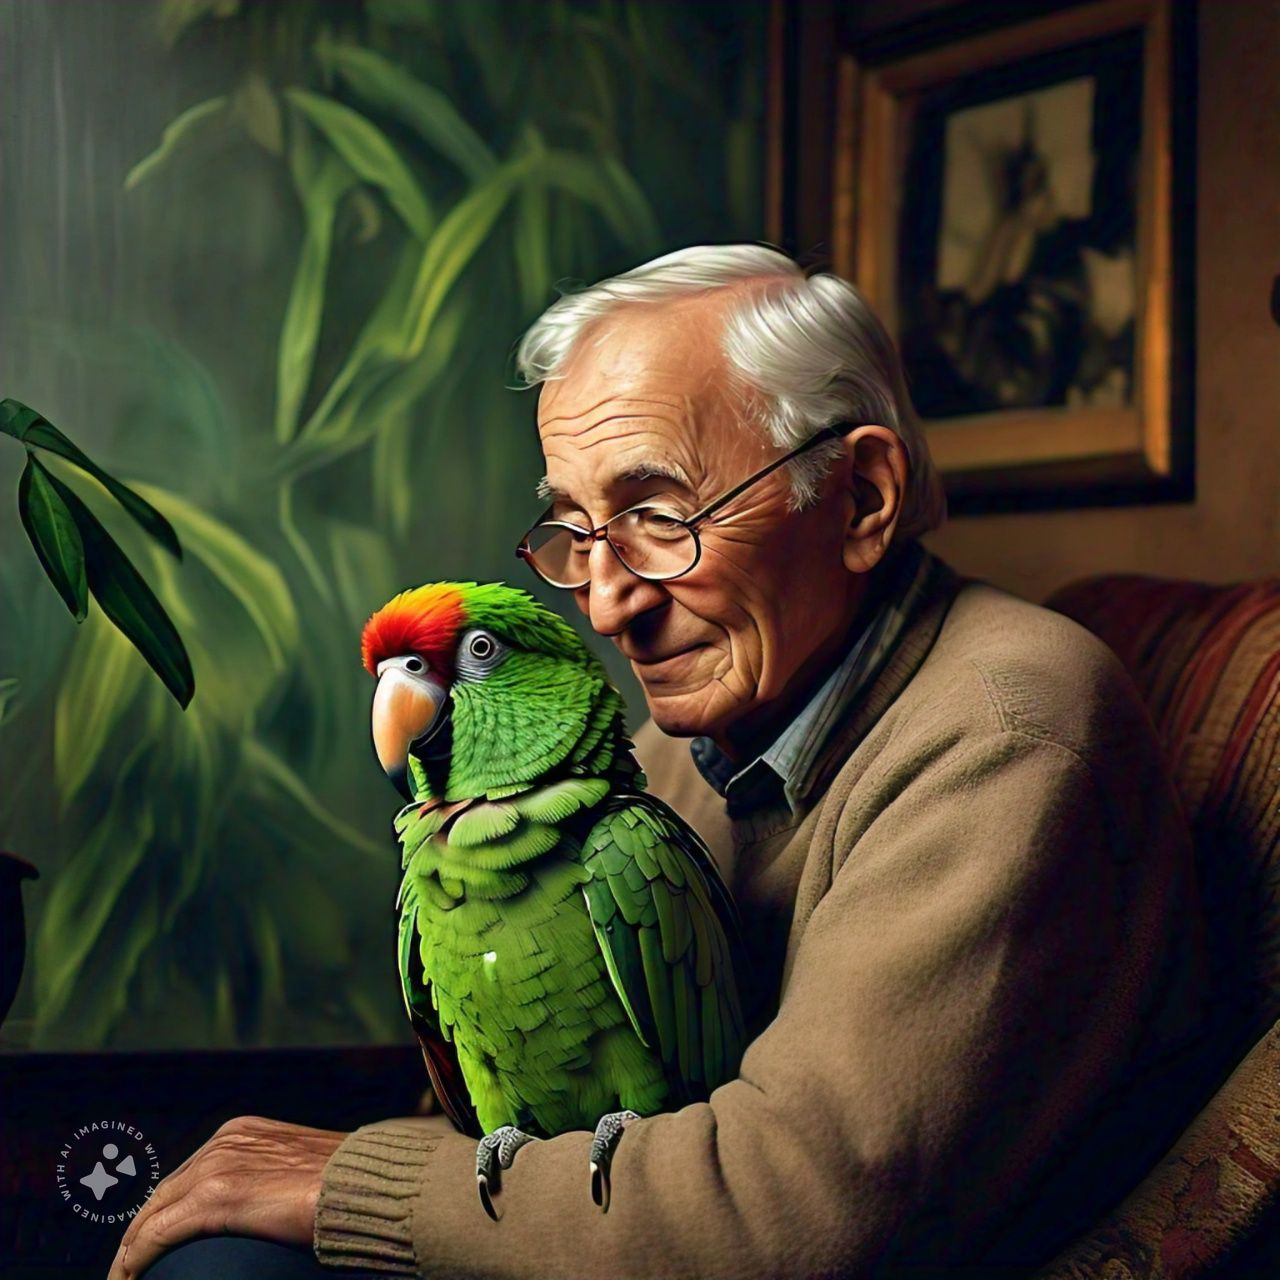 Papa's Parrot Adheres to Which Theme?